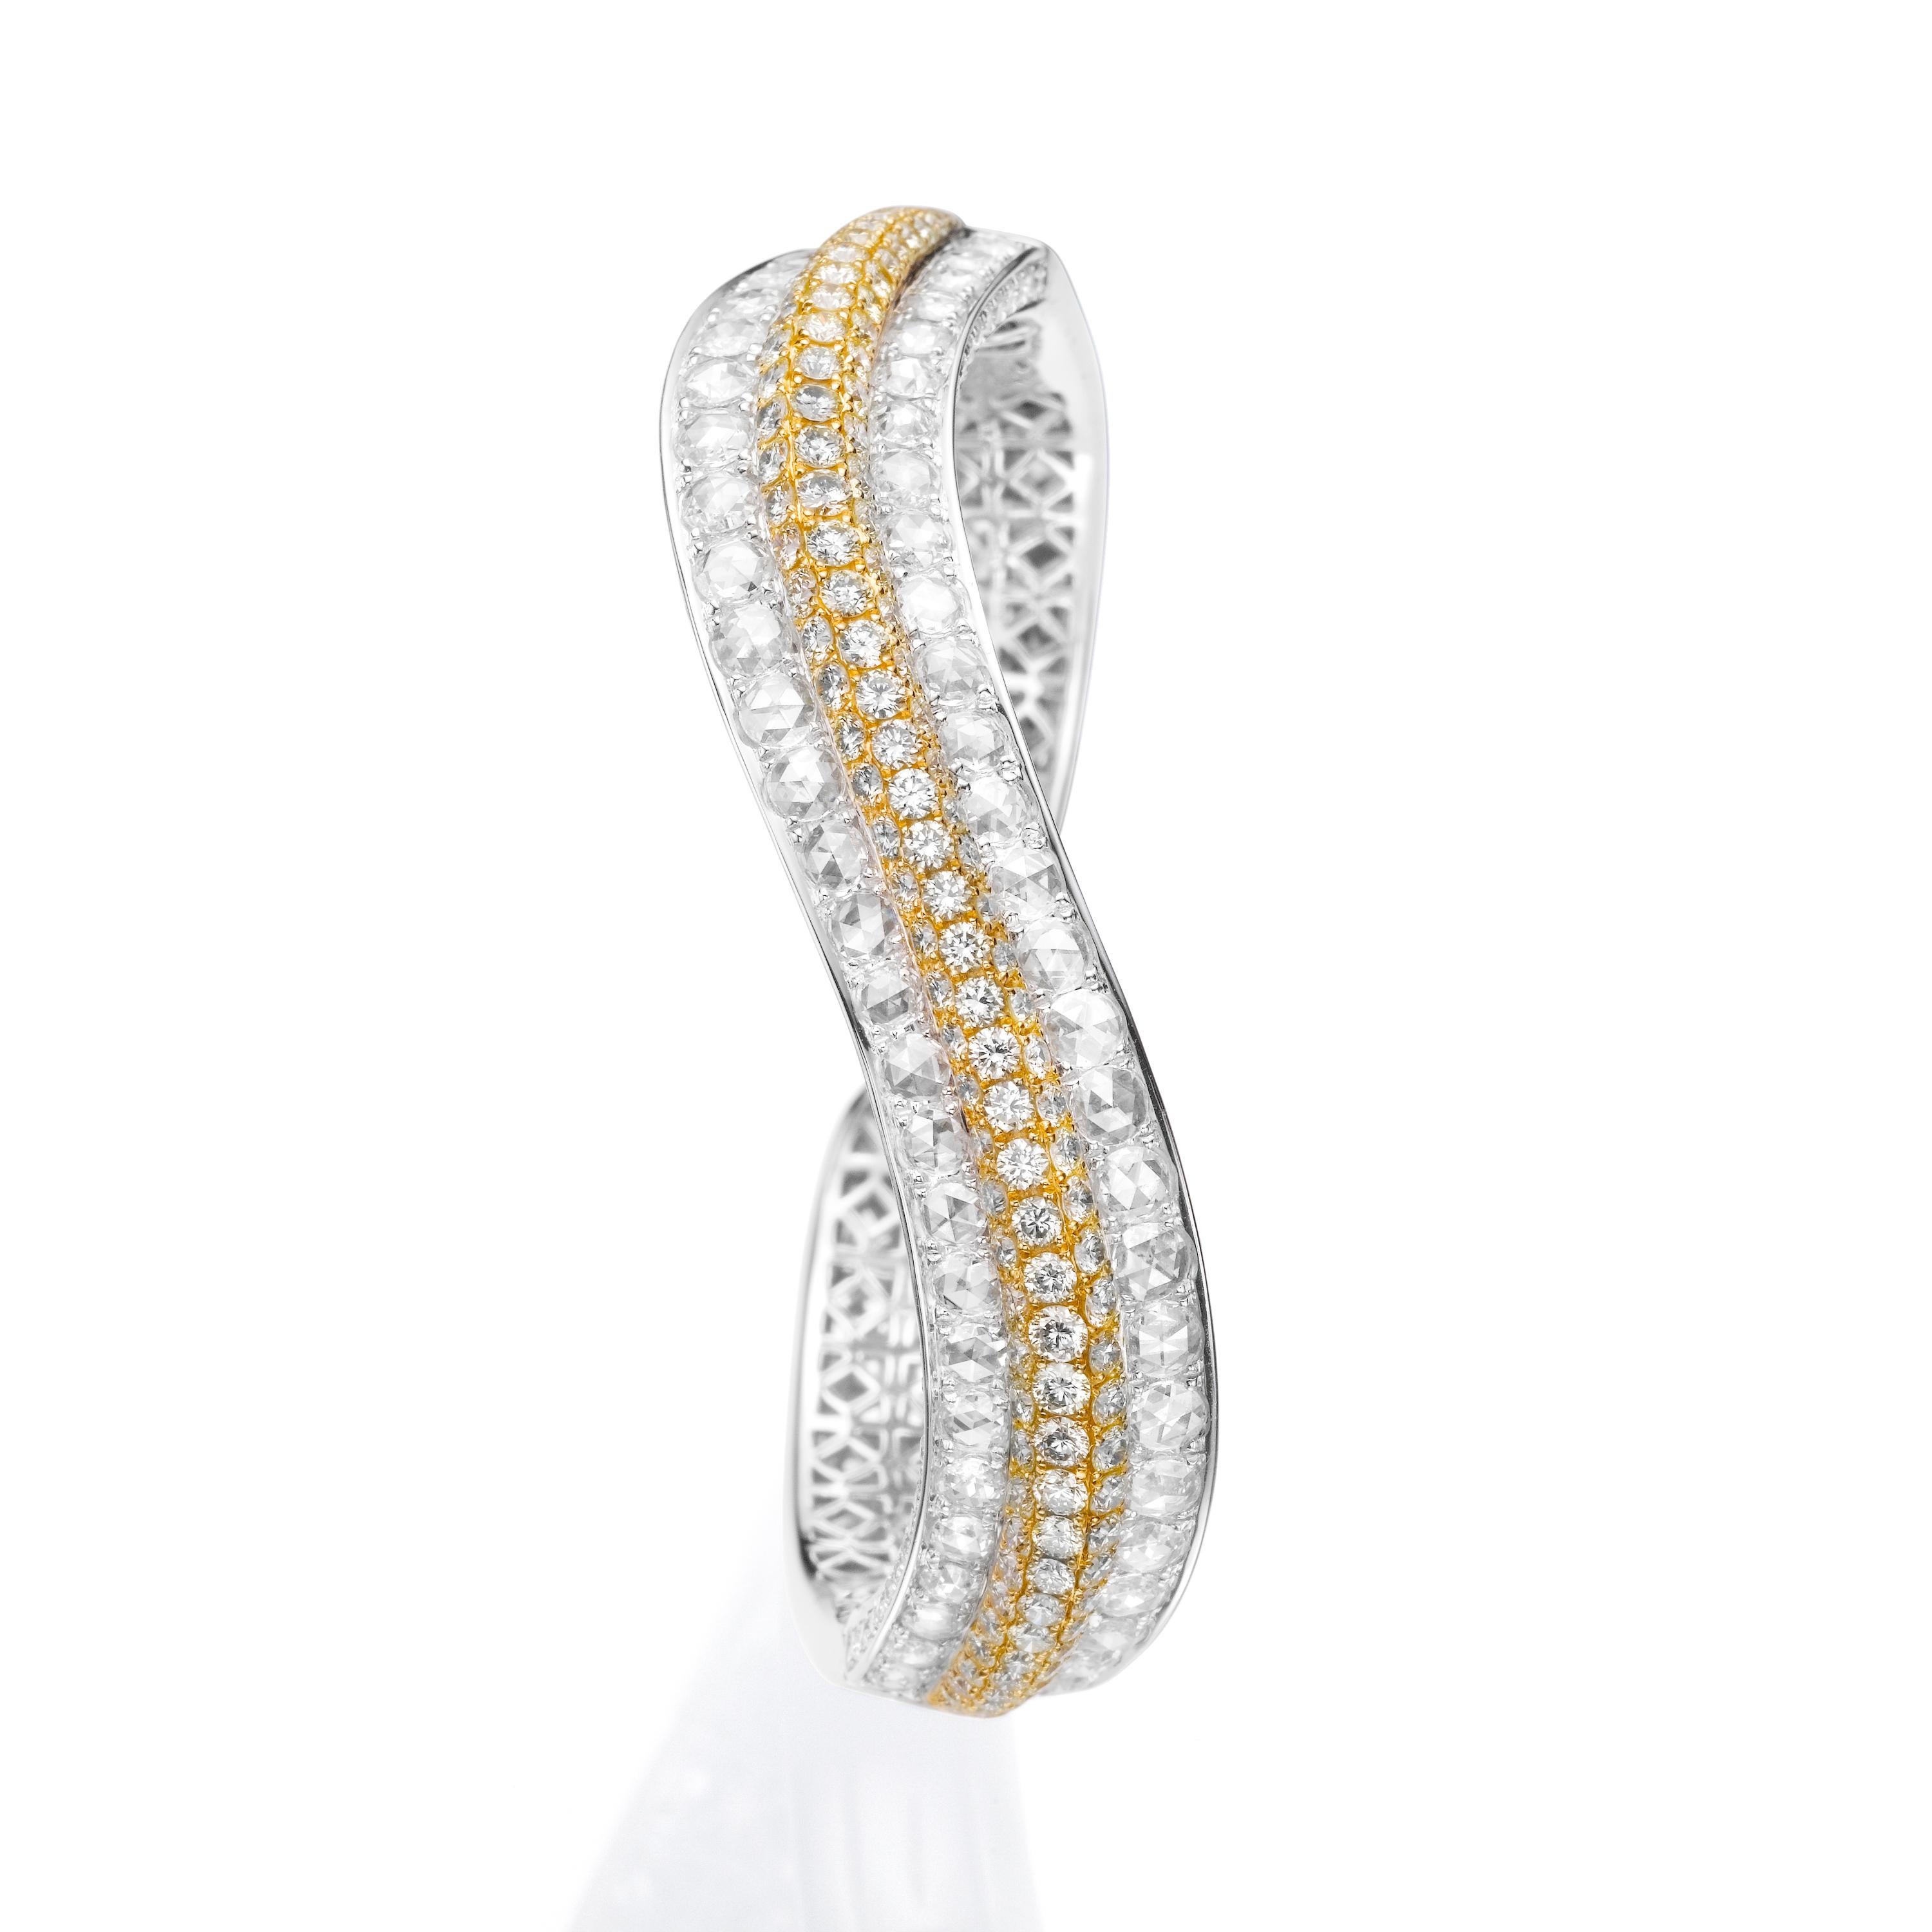 Butani's bangle is decorated with two rows of rose-cut round diamonds (totaling 4.22 carats) and a center row of round yellow diamonds (totaling 4.25 carats).  Set in a wave design and handcrafted from 18 karat gold, the bangle features an open band